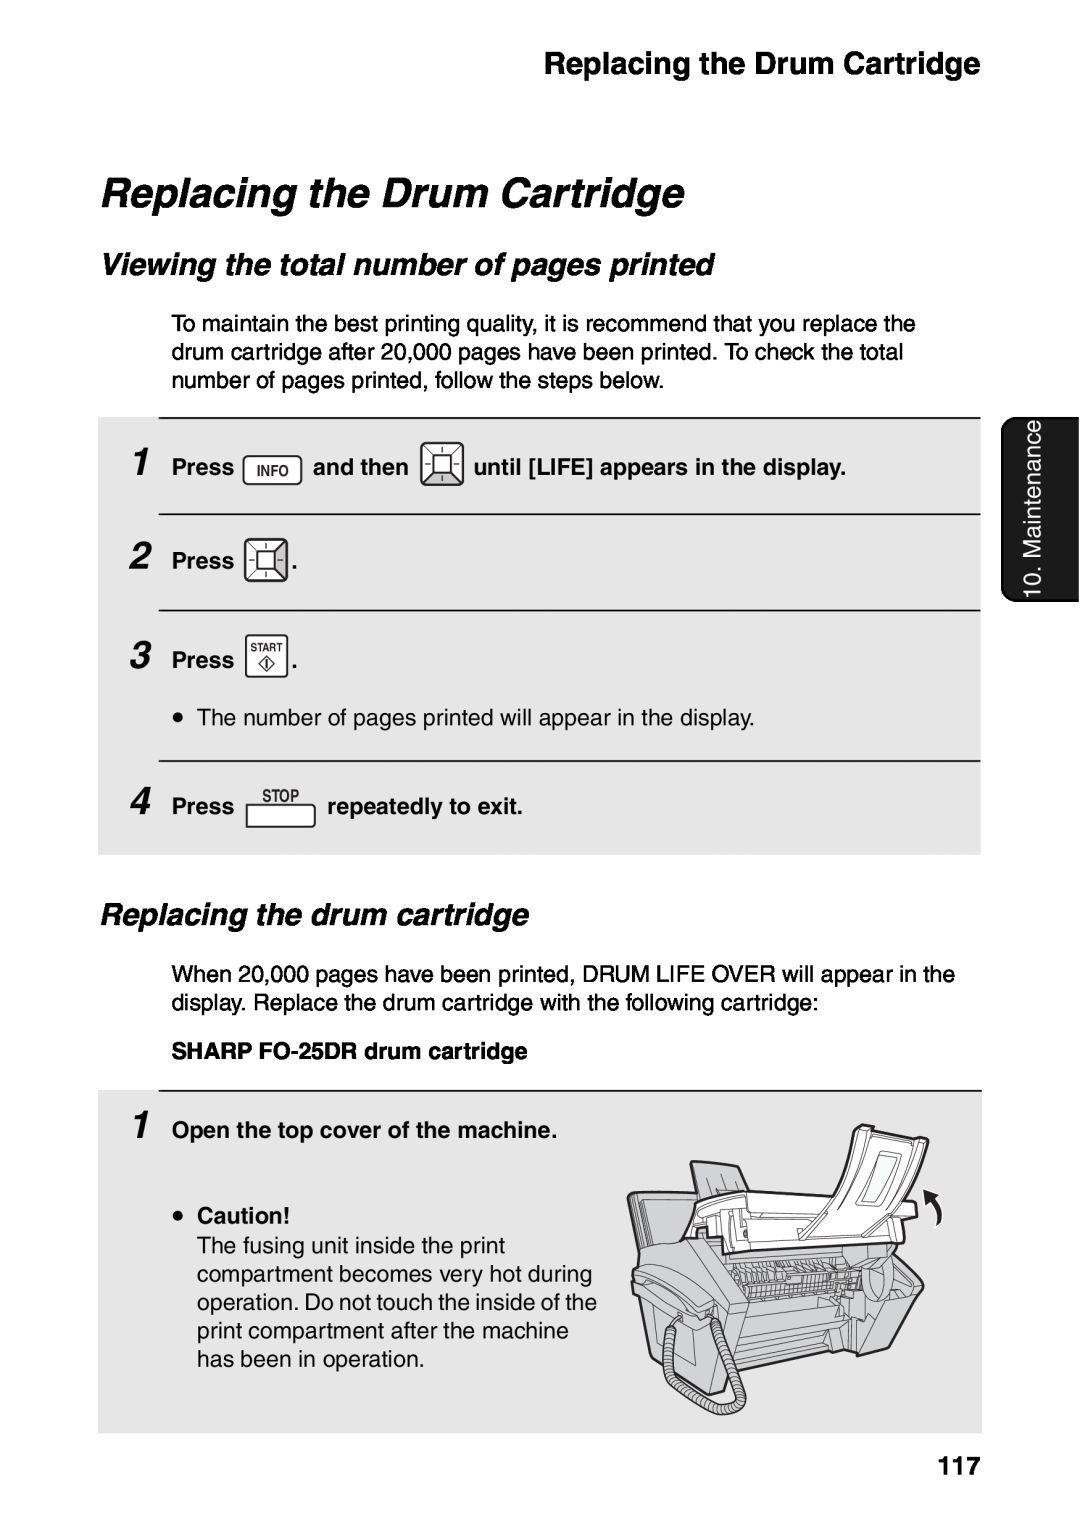 Sharp FO-IS115N Replacing the Drum Cartridge, Viewing the total number of pages printed, Replacing the drum cartridge 